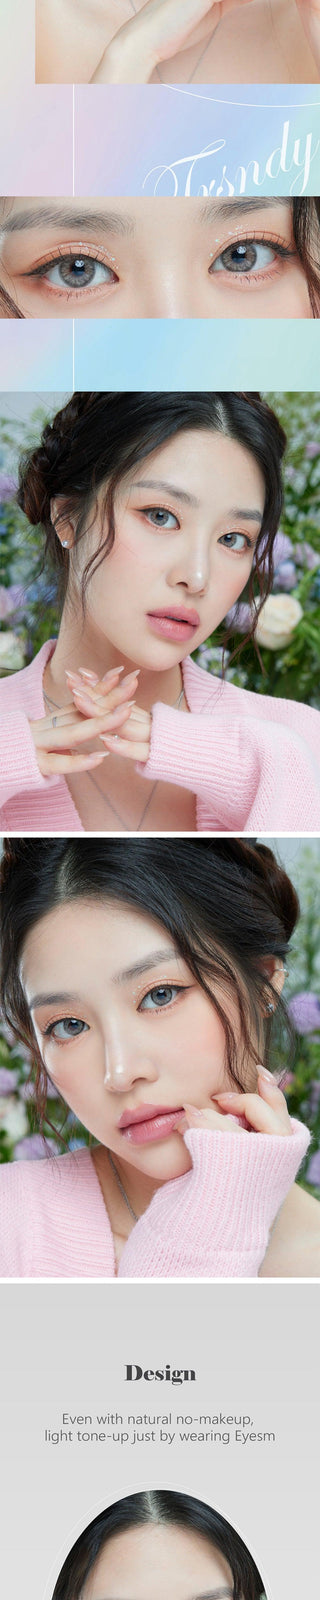 Several views of a Korean model with the Eyesm Sephia Grey color contact lenses. An enlargement of a model's eyes with the prescription colored contacts, demonstrating the subtle yet striking change on dark eyes.